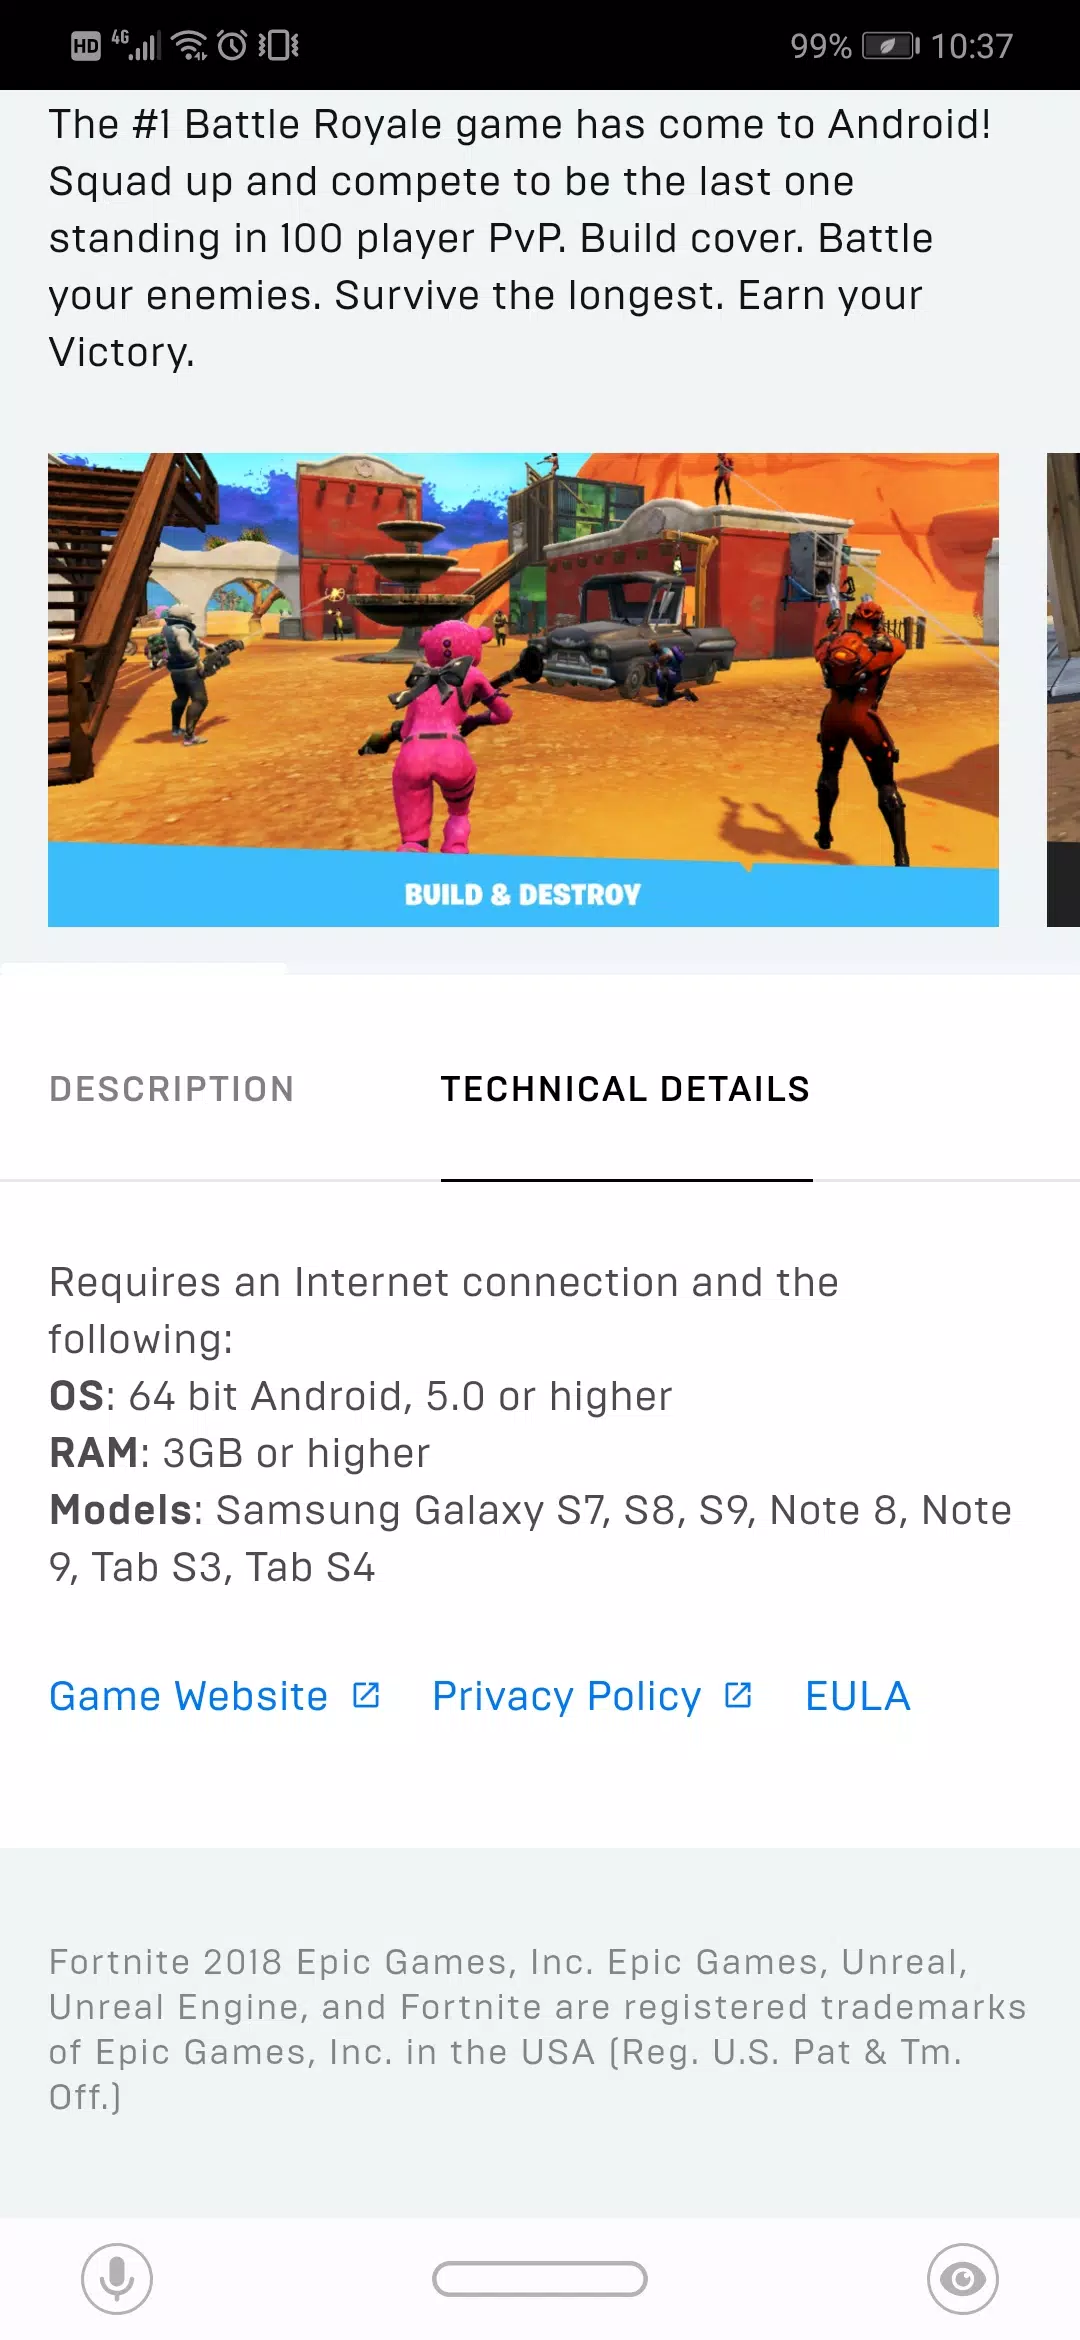 Epic Games APK 5.3.0 Download For Android 2023